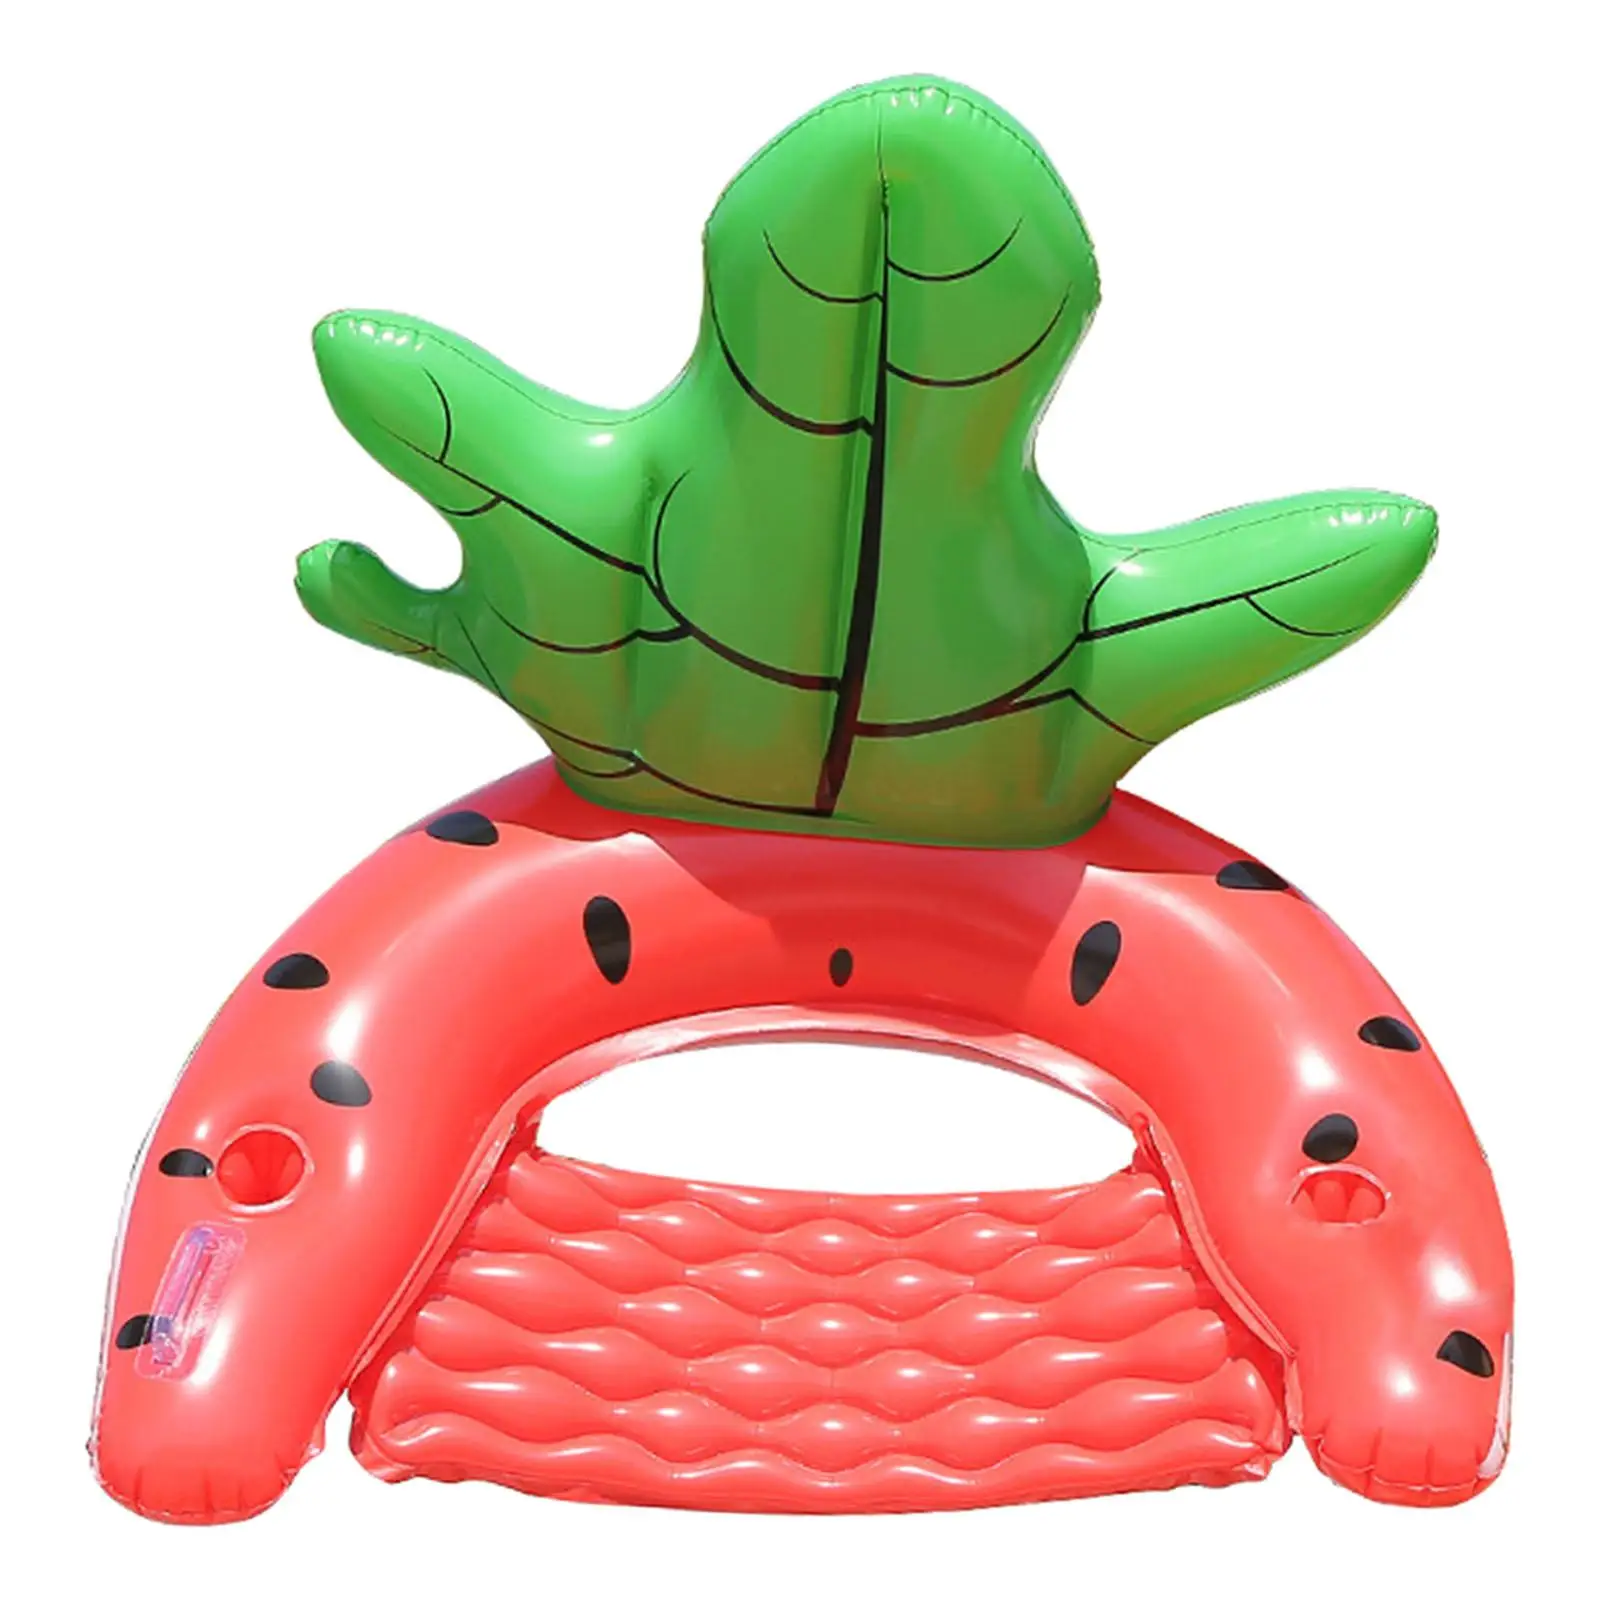 Inflatable Pool Float Inflatable Pool Lounge Chair Float with Handles Beach Float Chair Lake Raft for Pool Beach Summer